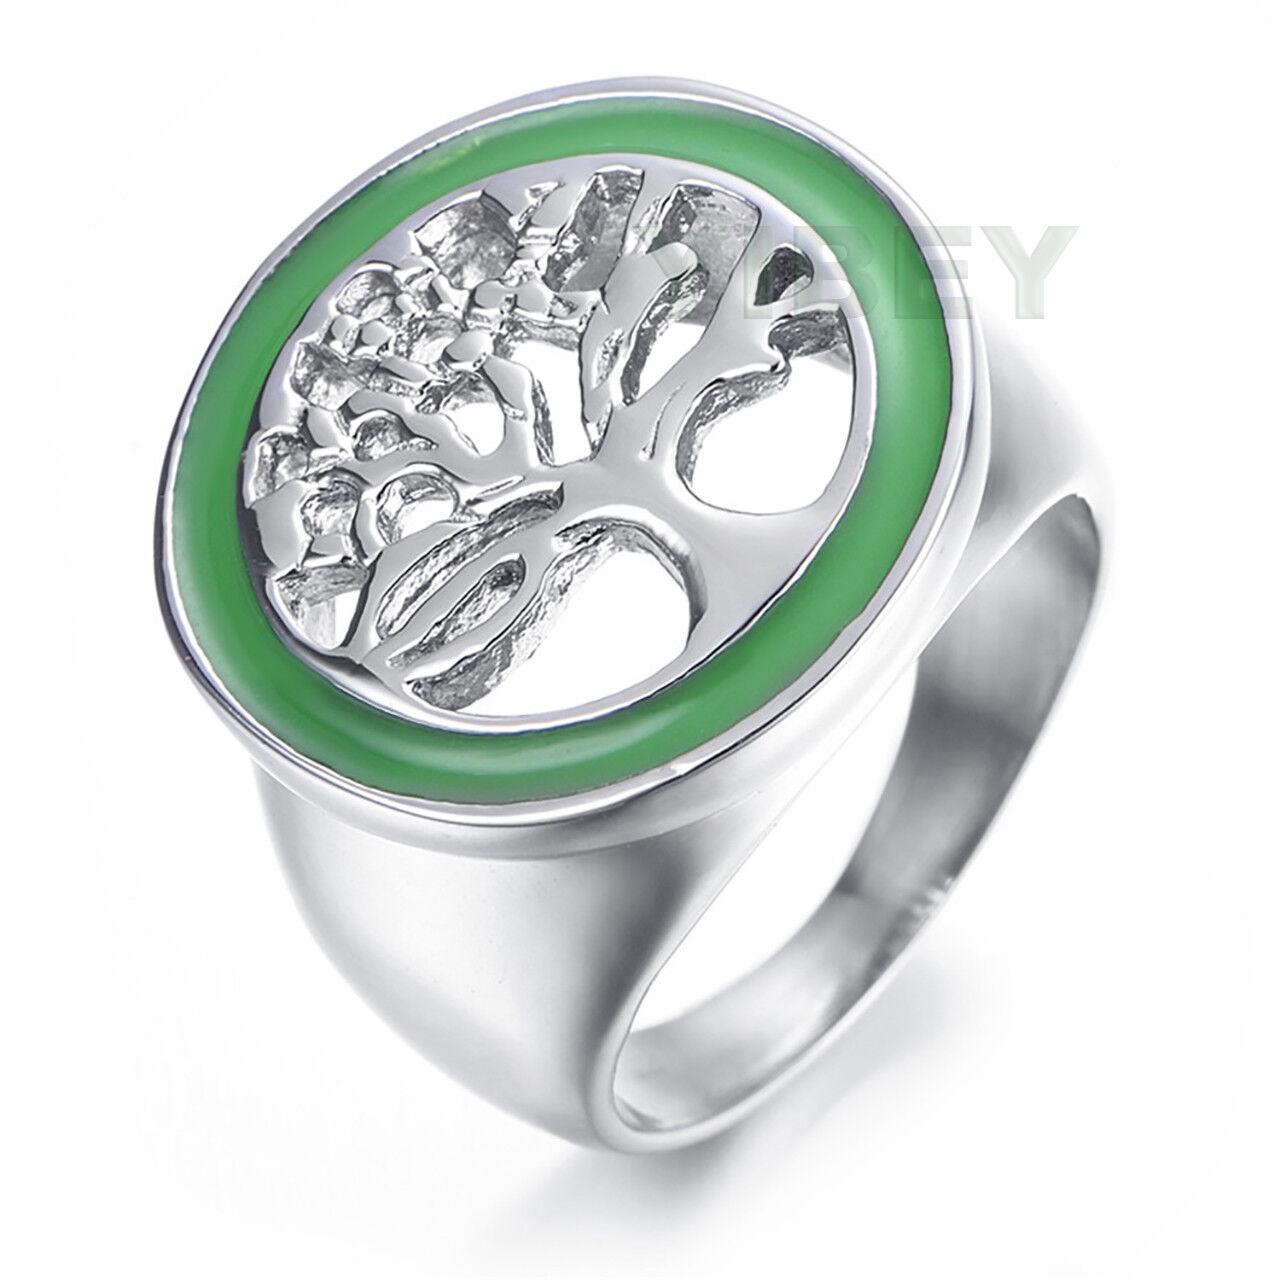 Stainless Steel Cast TREE OF LIFE Green Ring Awakening Root polished Silver Tone